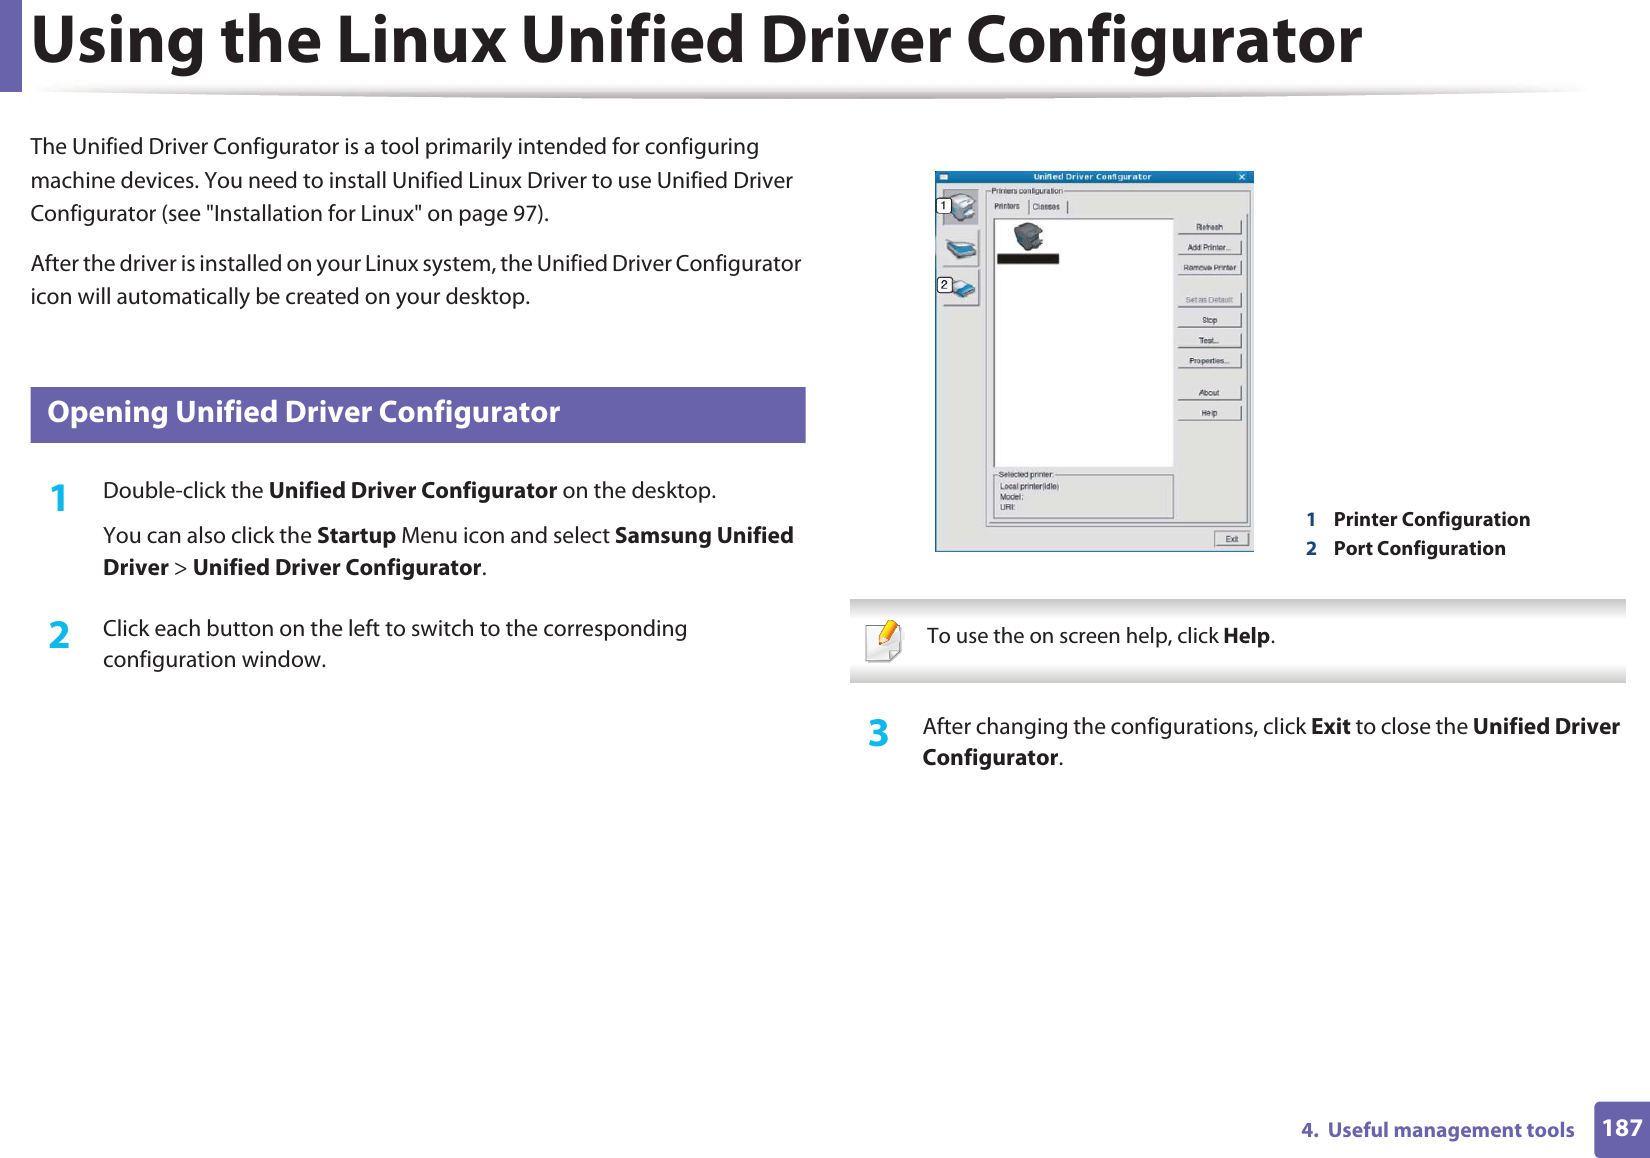 1874.  Useful management toolsUsing the Linux Unified Driver ConfiguratorThe Unified Driver Configurator is a tool primarily intended for configuring machine devices. You need to install Unified Linux Driver to use Unified Driver Configurator (see &quot;Installation for Linux&quot; on page 97).After the driver is installed on your Linux system, the Unified Driver Configurator icon will automatically be created on your desktop.9 Opening Unified Driver Configurator1Double-click the Unified Driver Configurator on the desktop.You can also click the Startup Menu icon and select Samsung Unified Driver &gt; Unified Driver Configurator.2  Click each button on the left to switch to the corresponding configuration window.  To use the on screen help, click Help. 3  After changing the configurations, click Exit to close the Unified Driver Configurator.1Printer Configuration 2Port Configuration 